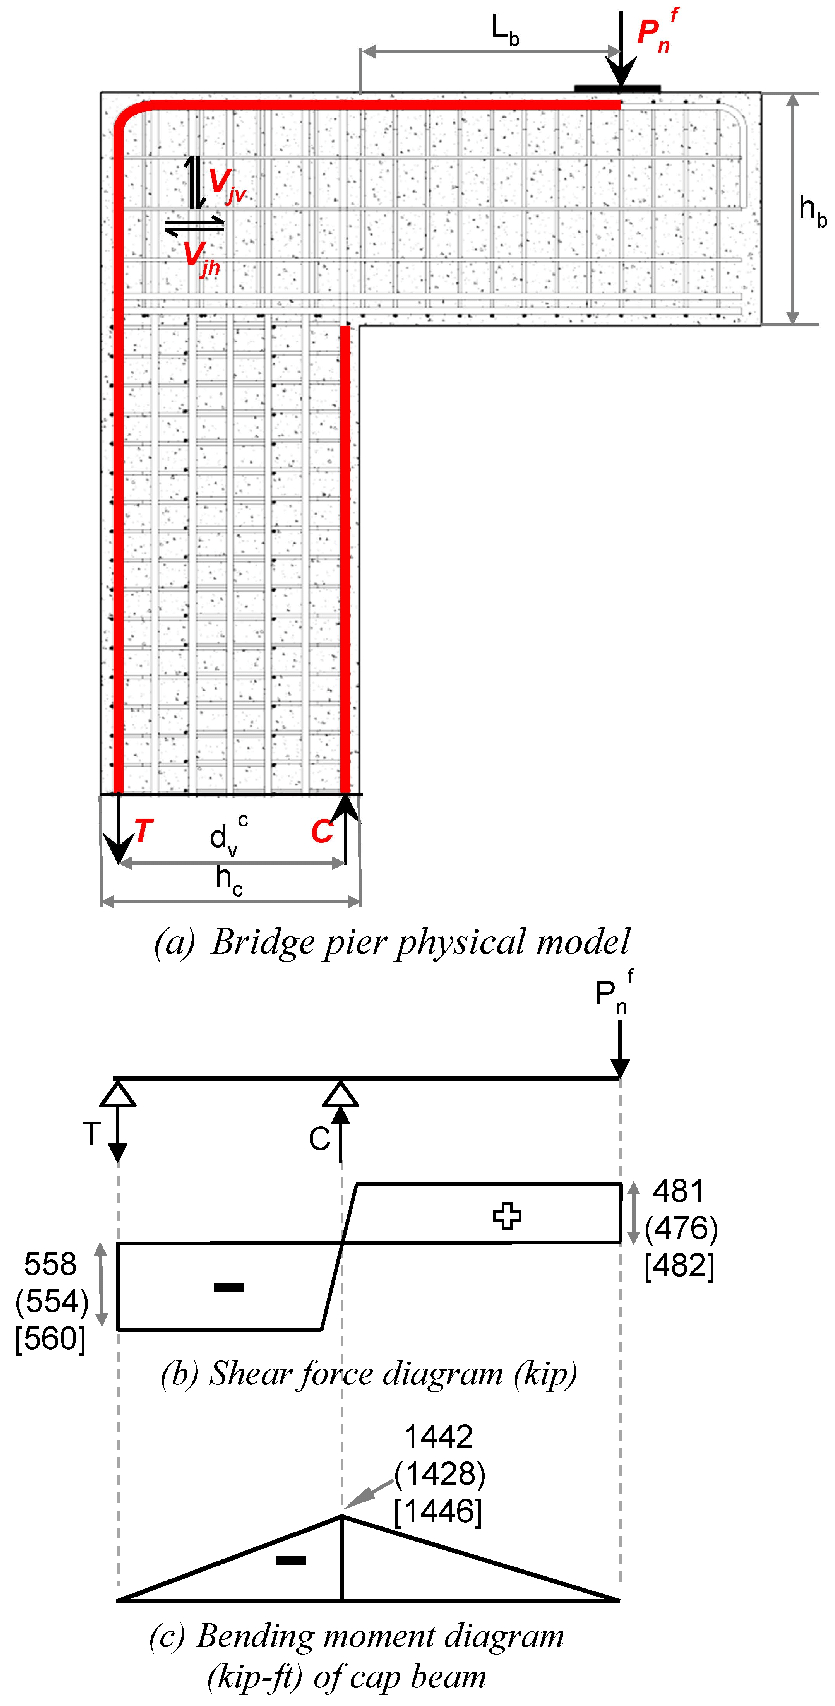 Shear Moment Diagram Shear Force And Bending Moment Diagram Of The Equivalent Beam Model